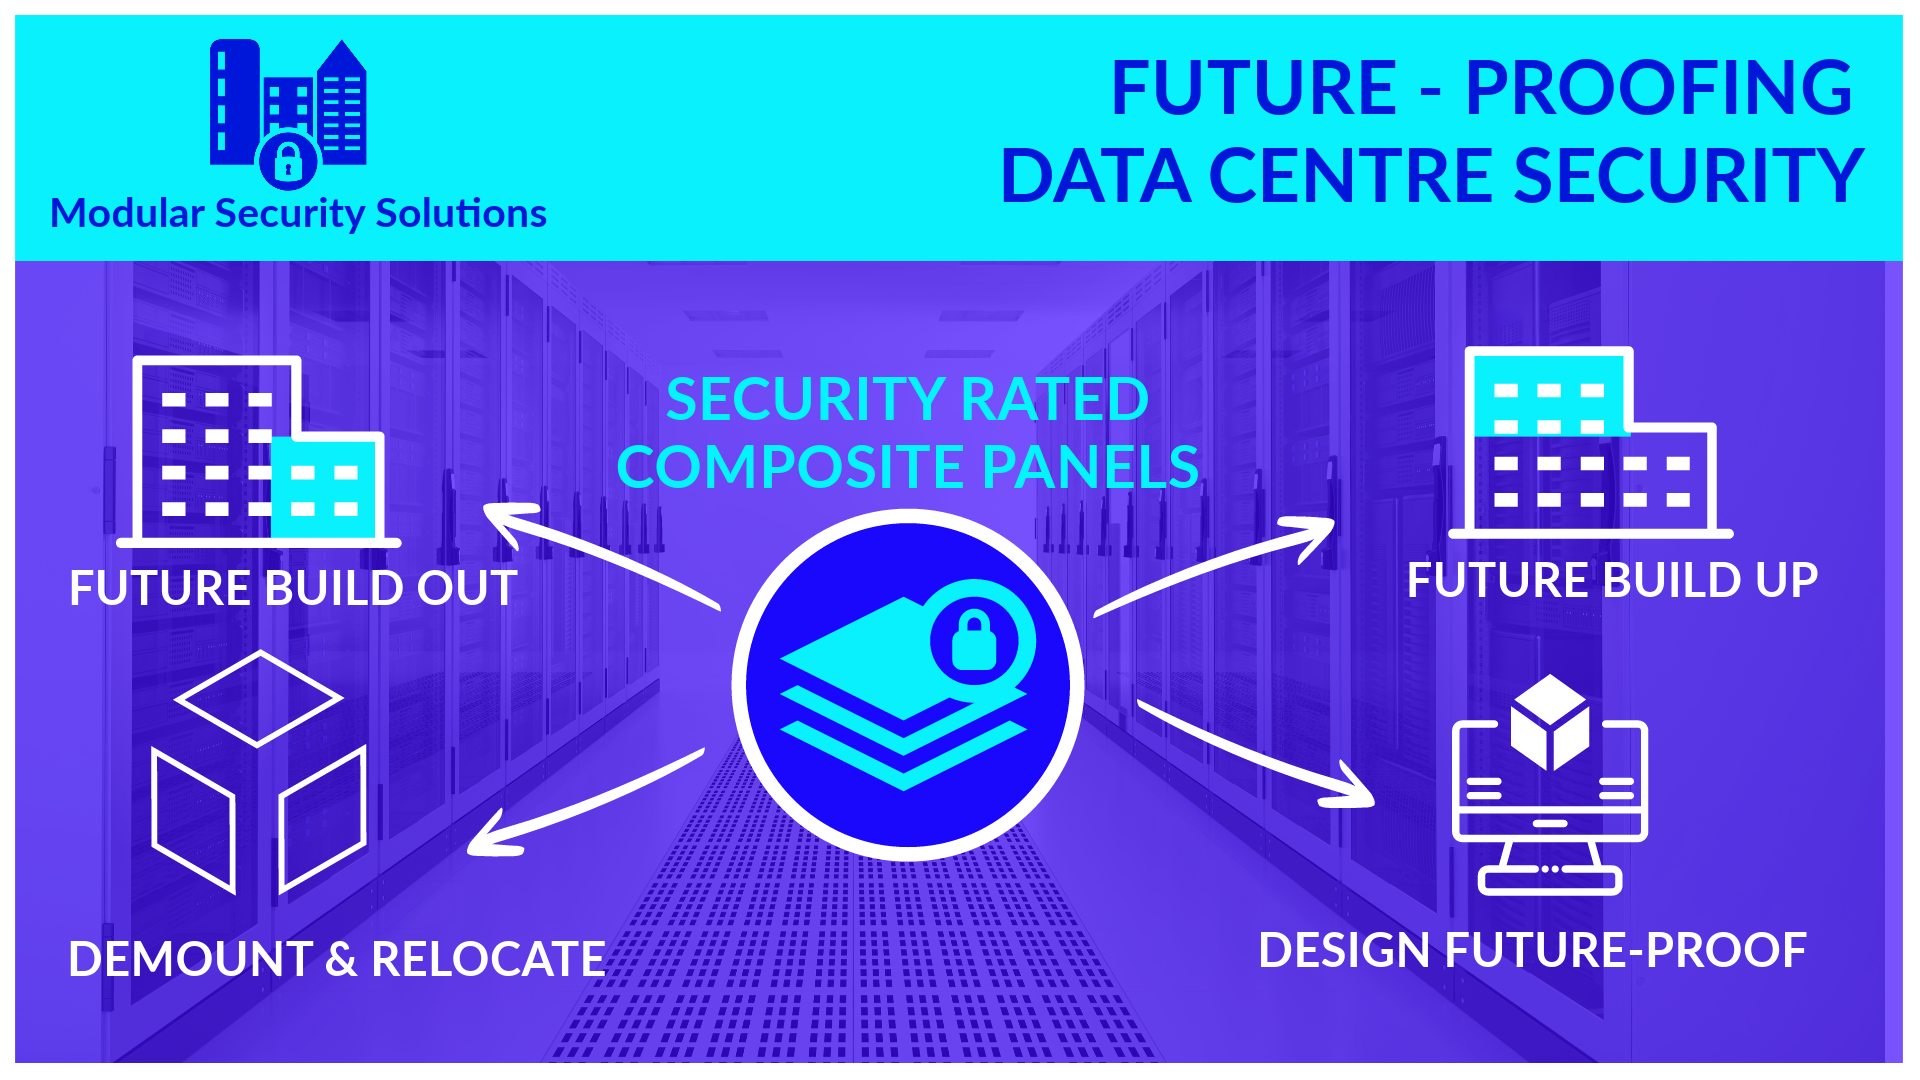 How Future Proof Is Your Secure Physical Data Environment?